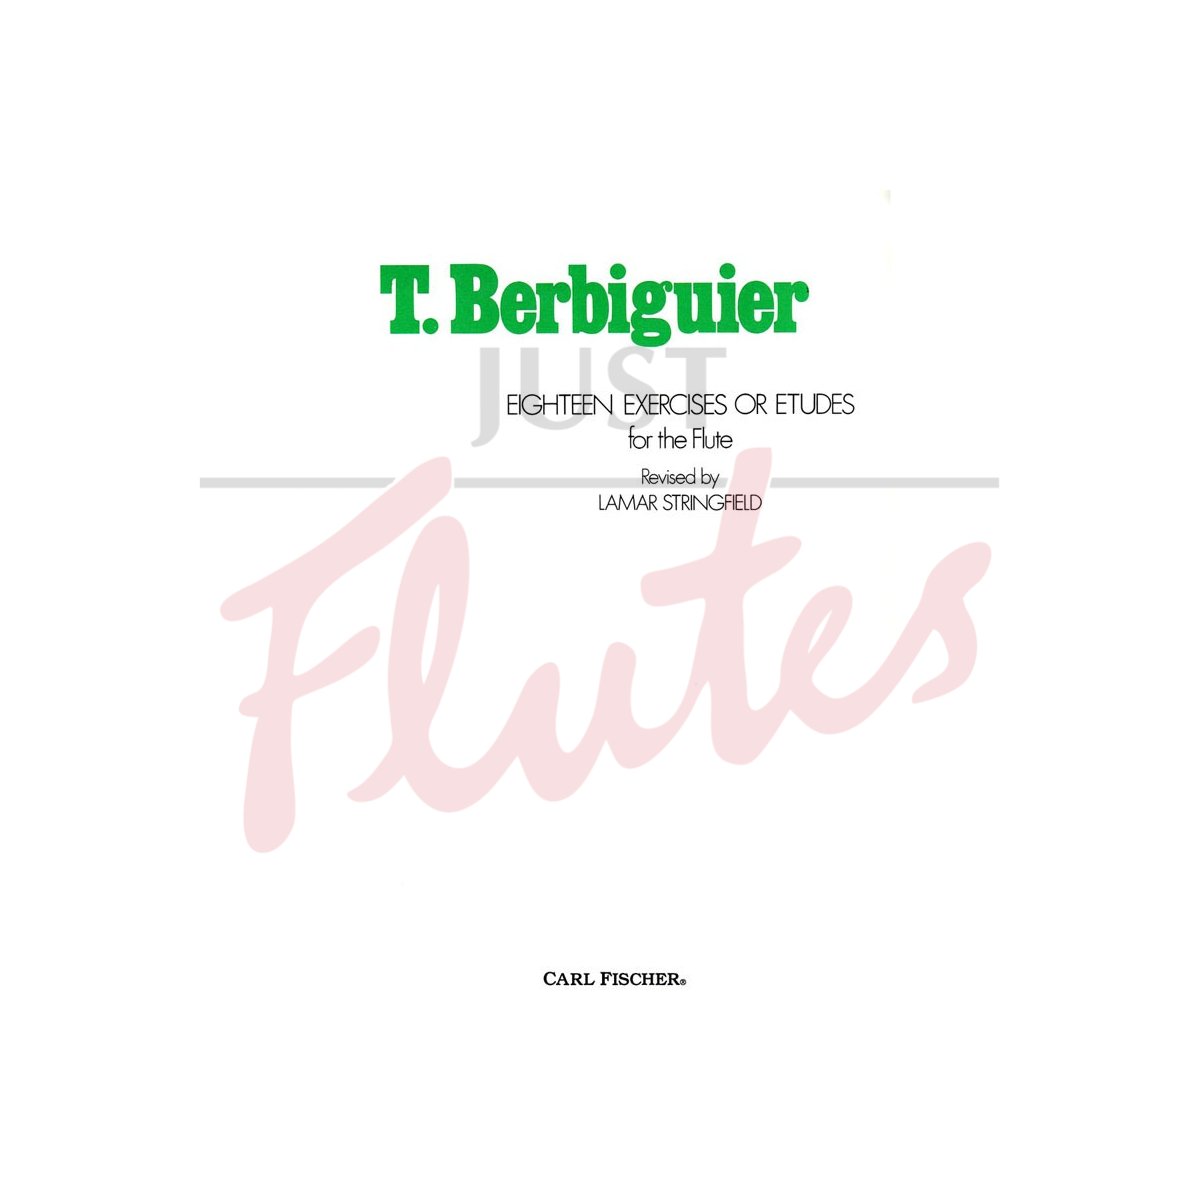 18 Exercises or Studies for Flute